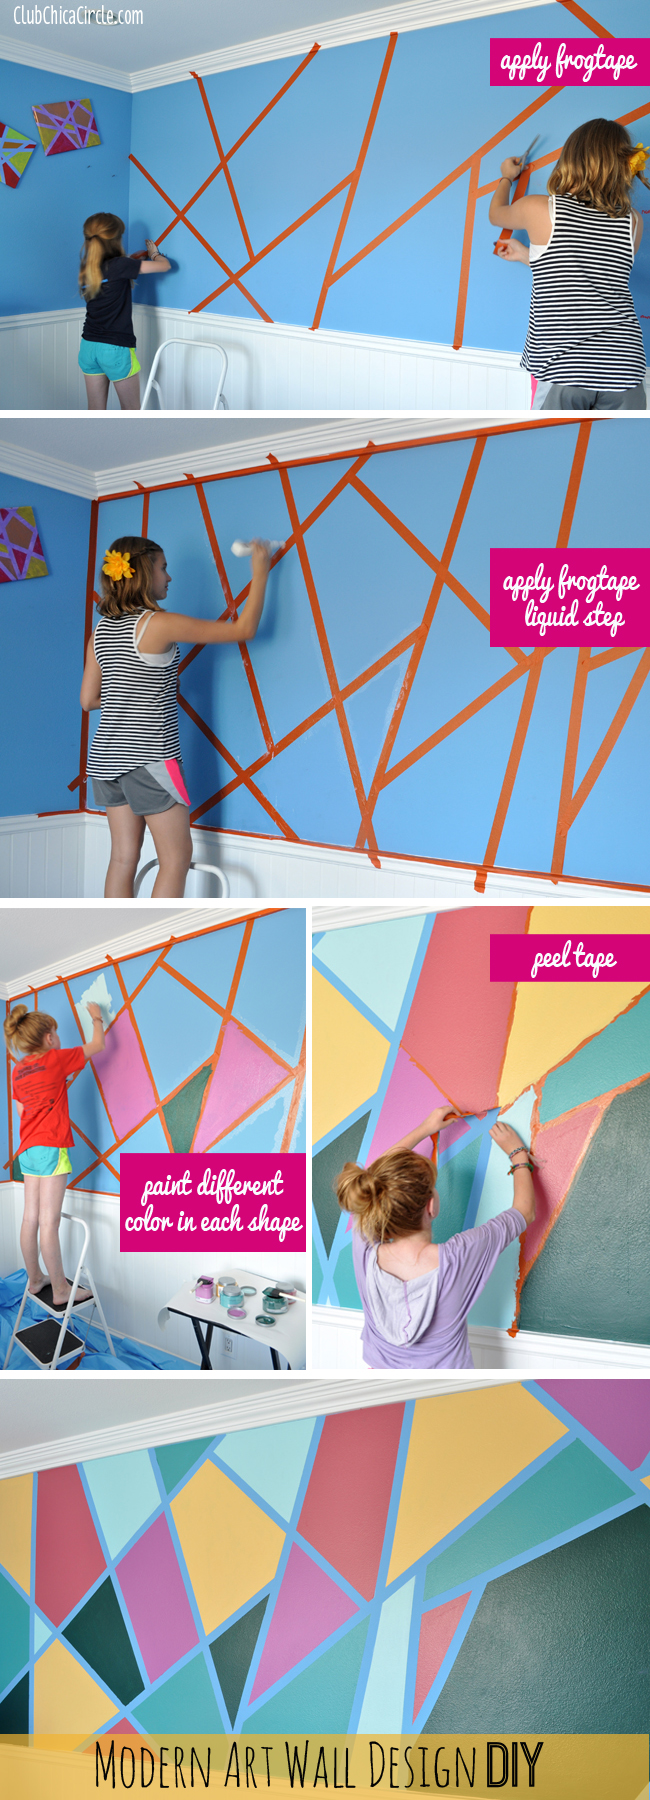 Modern Art Wall Design DIY for the Coolest Wall Ever!